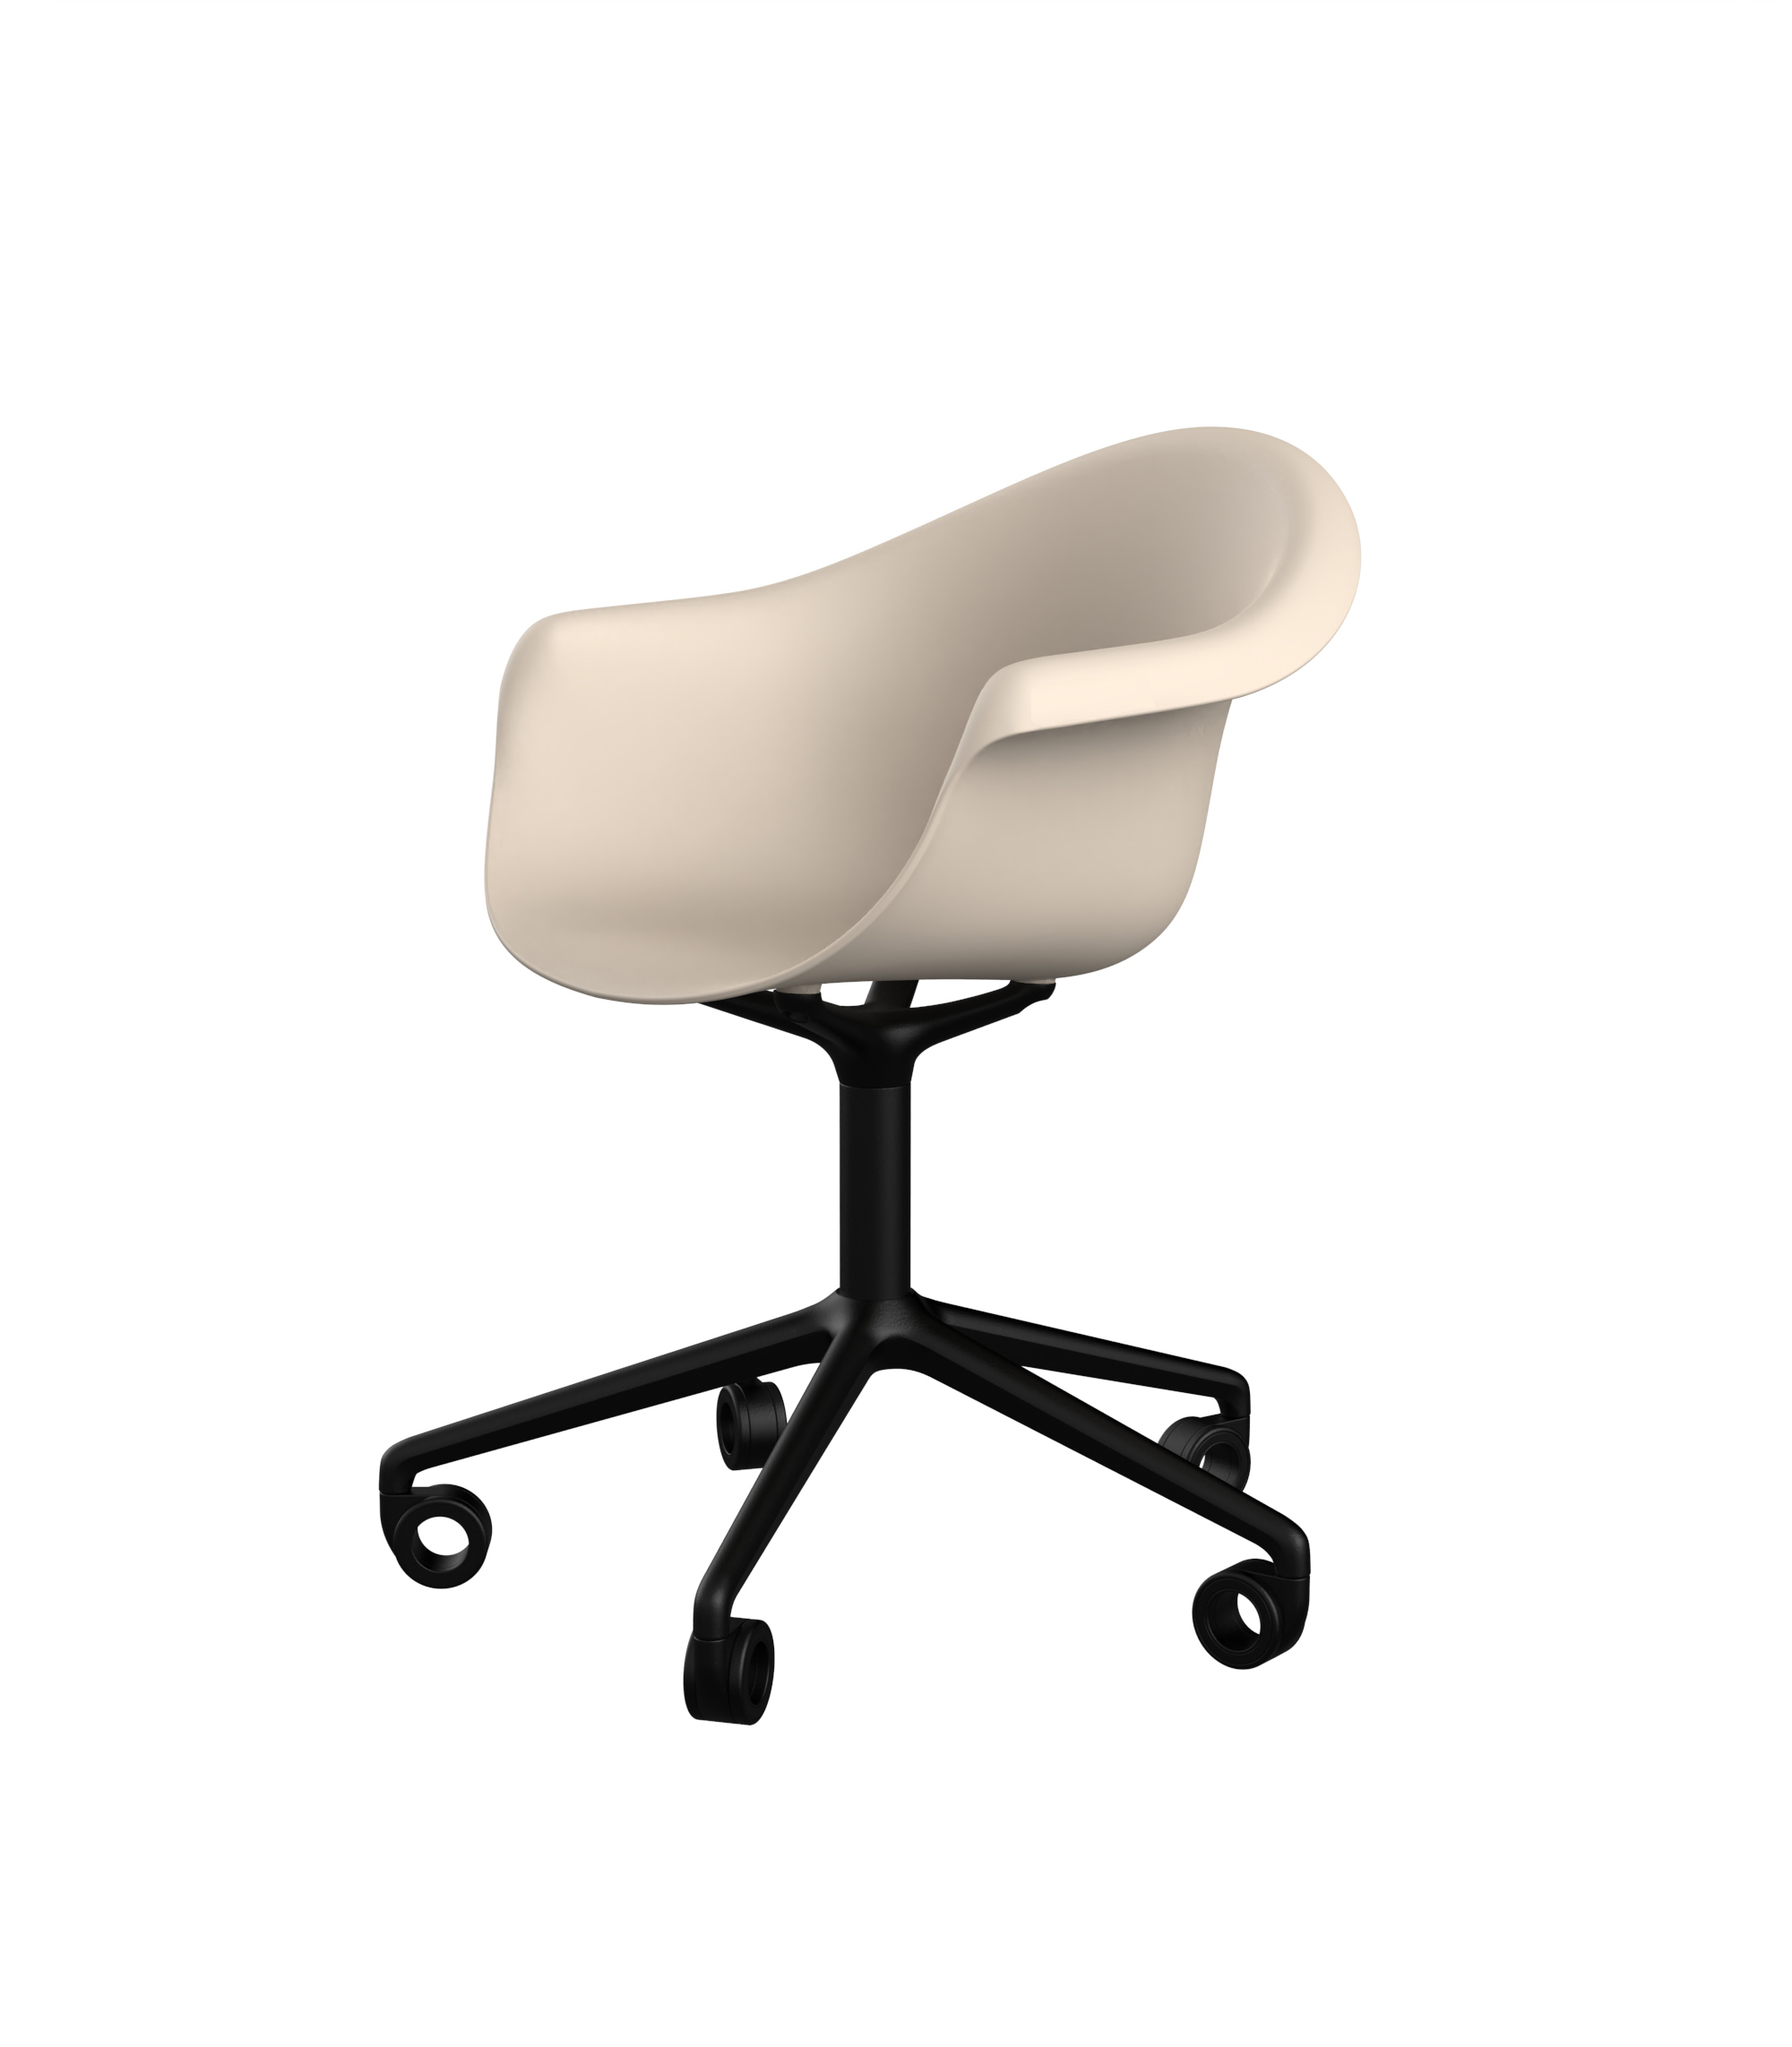 INCASSO SWIVEL ARMCHAIR WITH CASTER